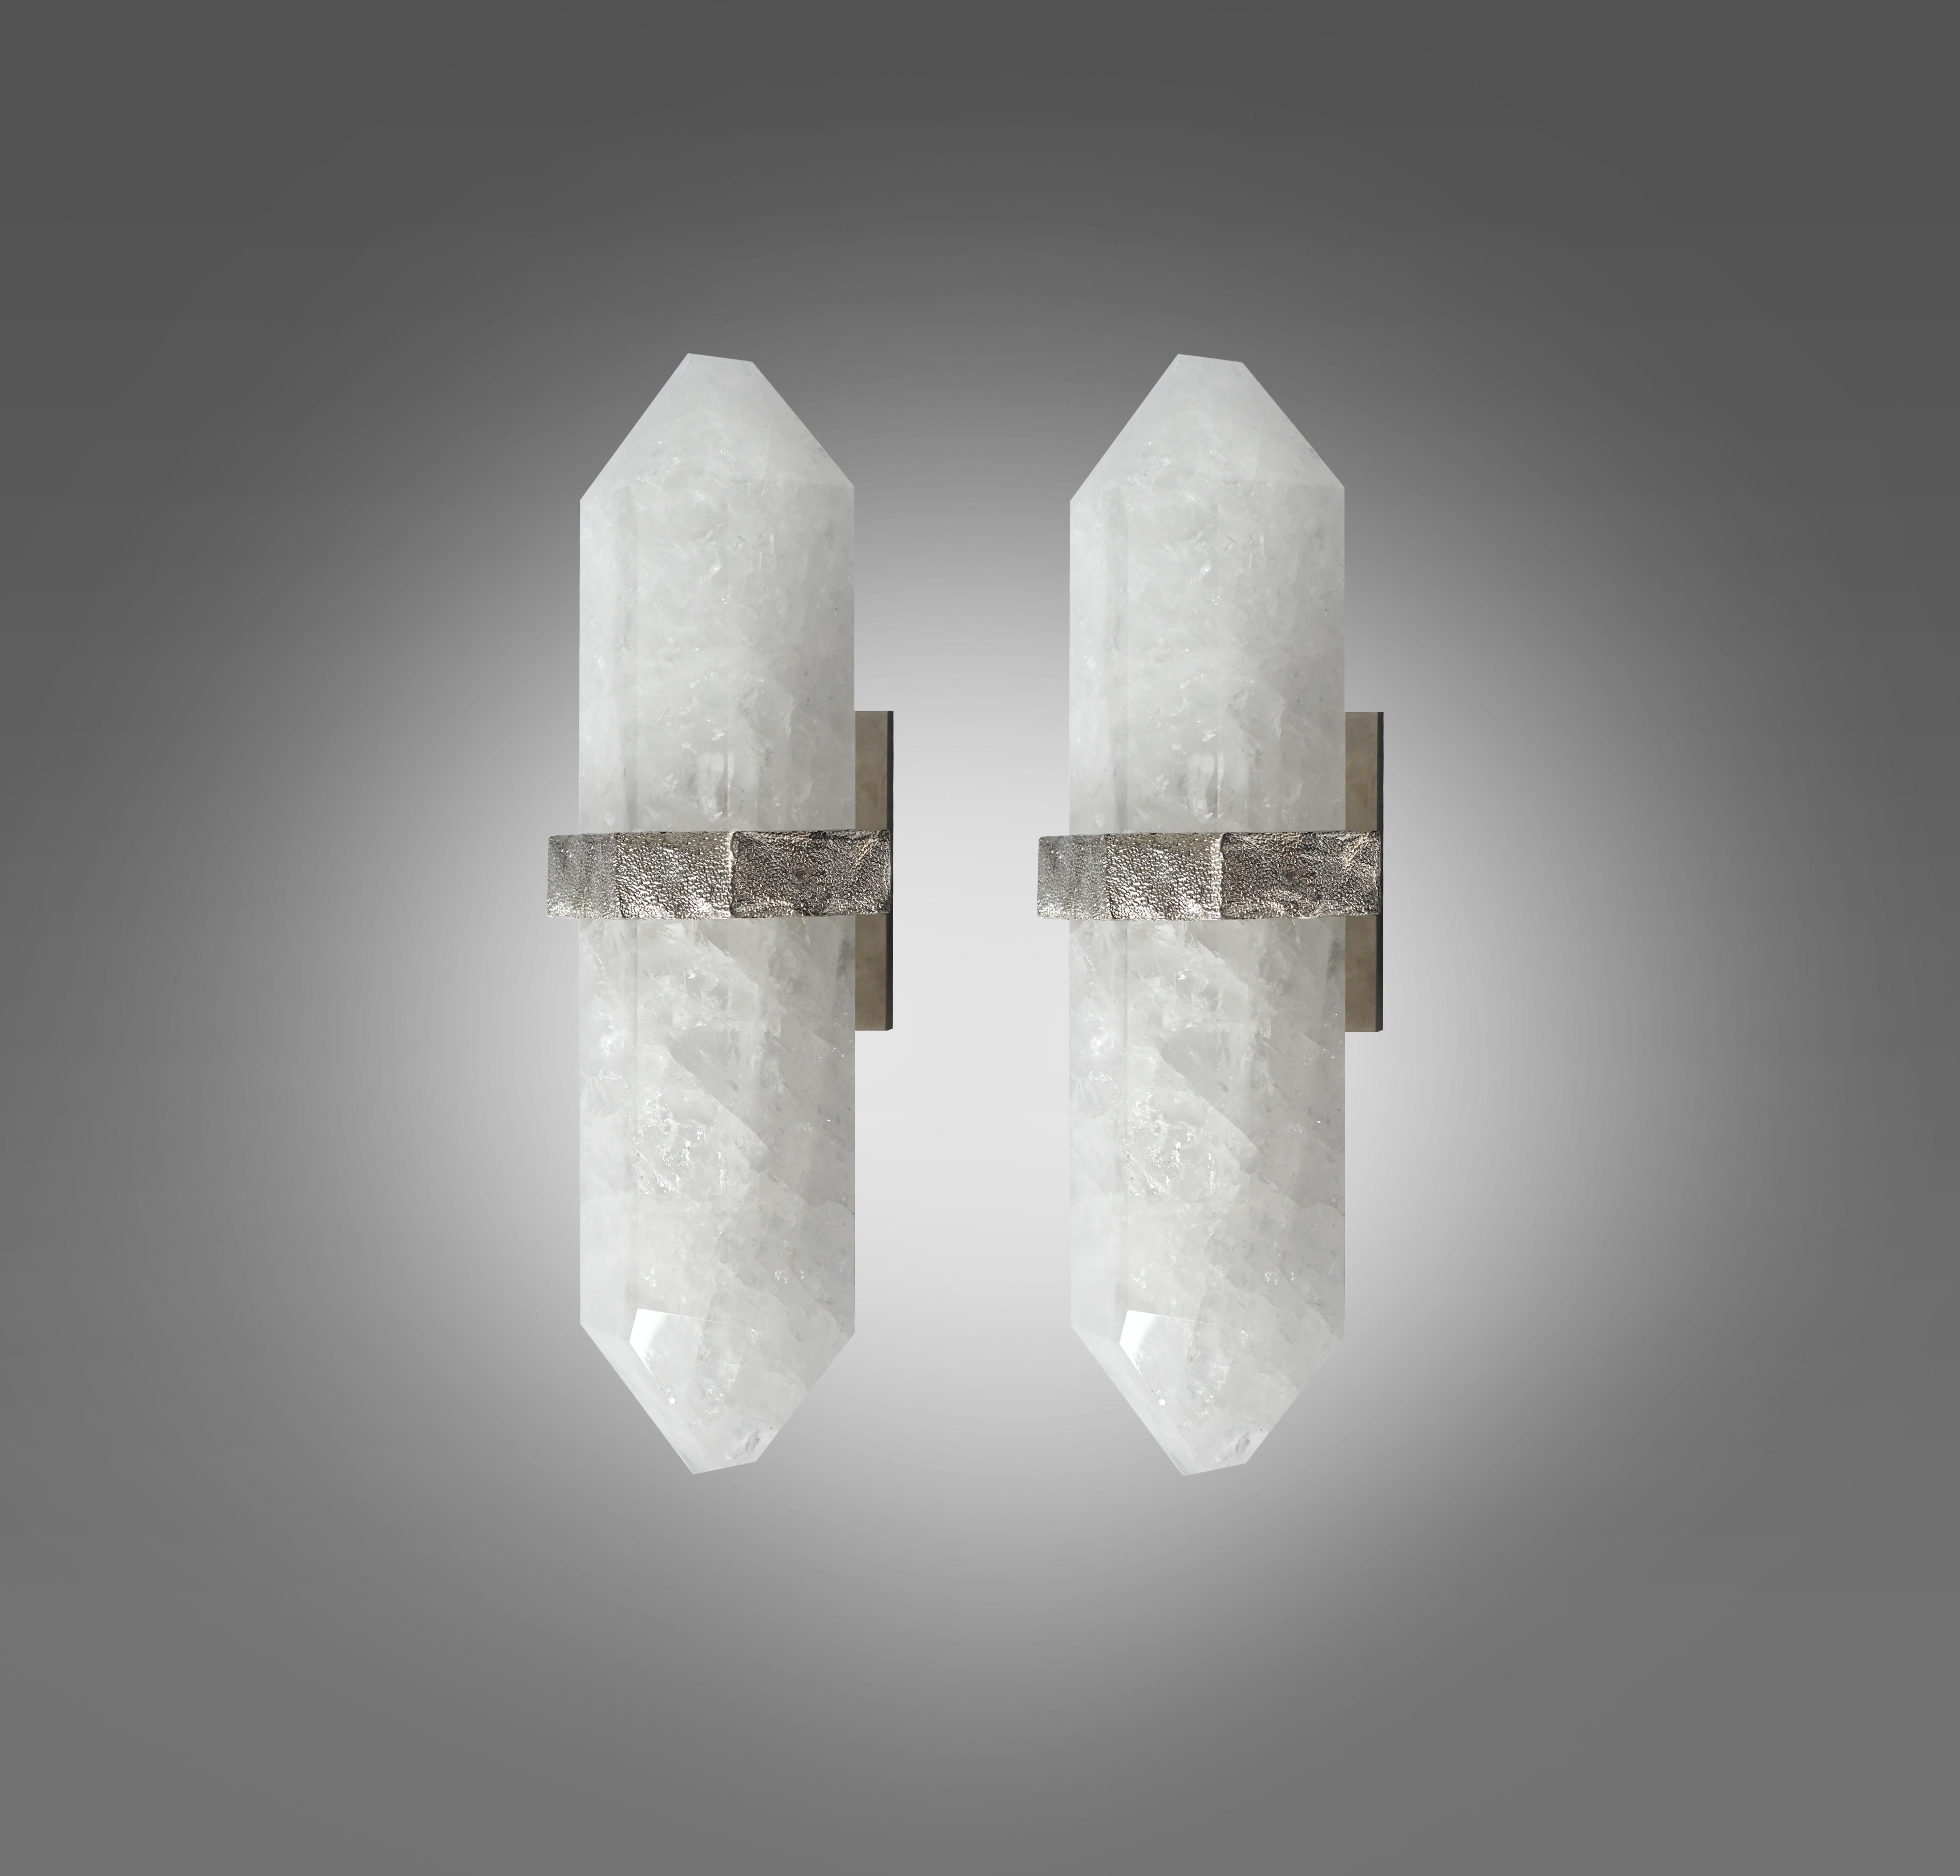 A fine carved diamond form rock crystal quartz wall sconces, mount with rich texture of cast nickel plating decoration, created by Phoenix gallery NYC. Custom size available.
Each sconce installed two sockets, and will including two LED light bulbs